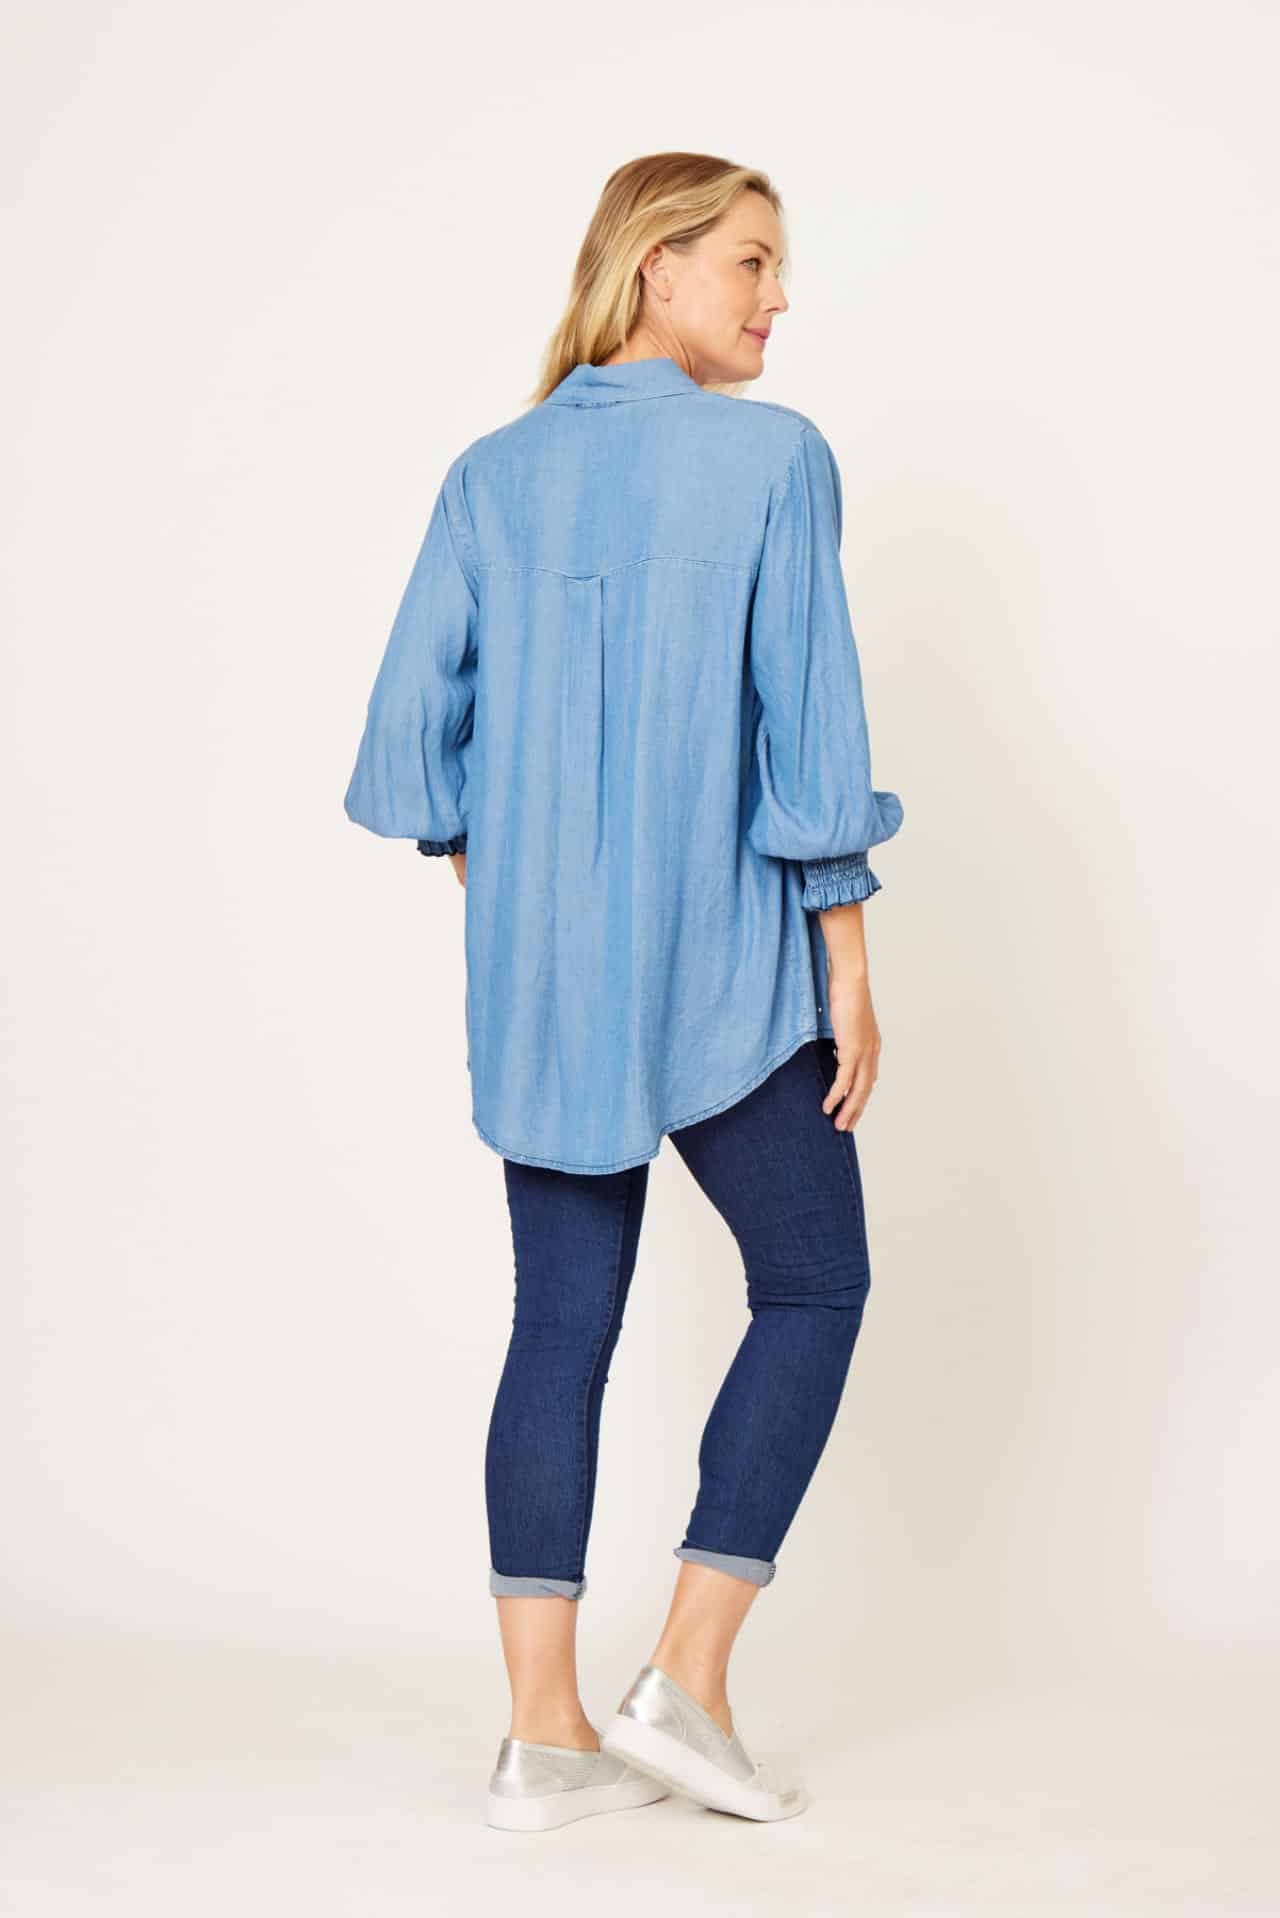 LA STRADA BLUE DENIM SHIRT WITH RUCHED SLEEVE AND DIAMANTE